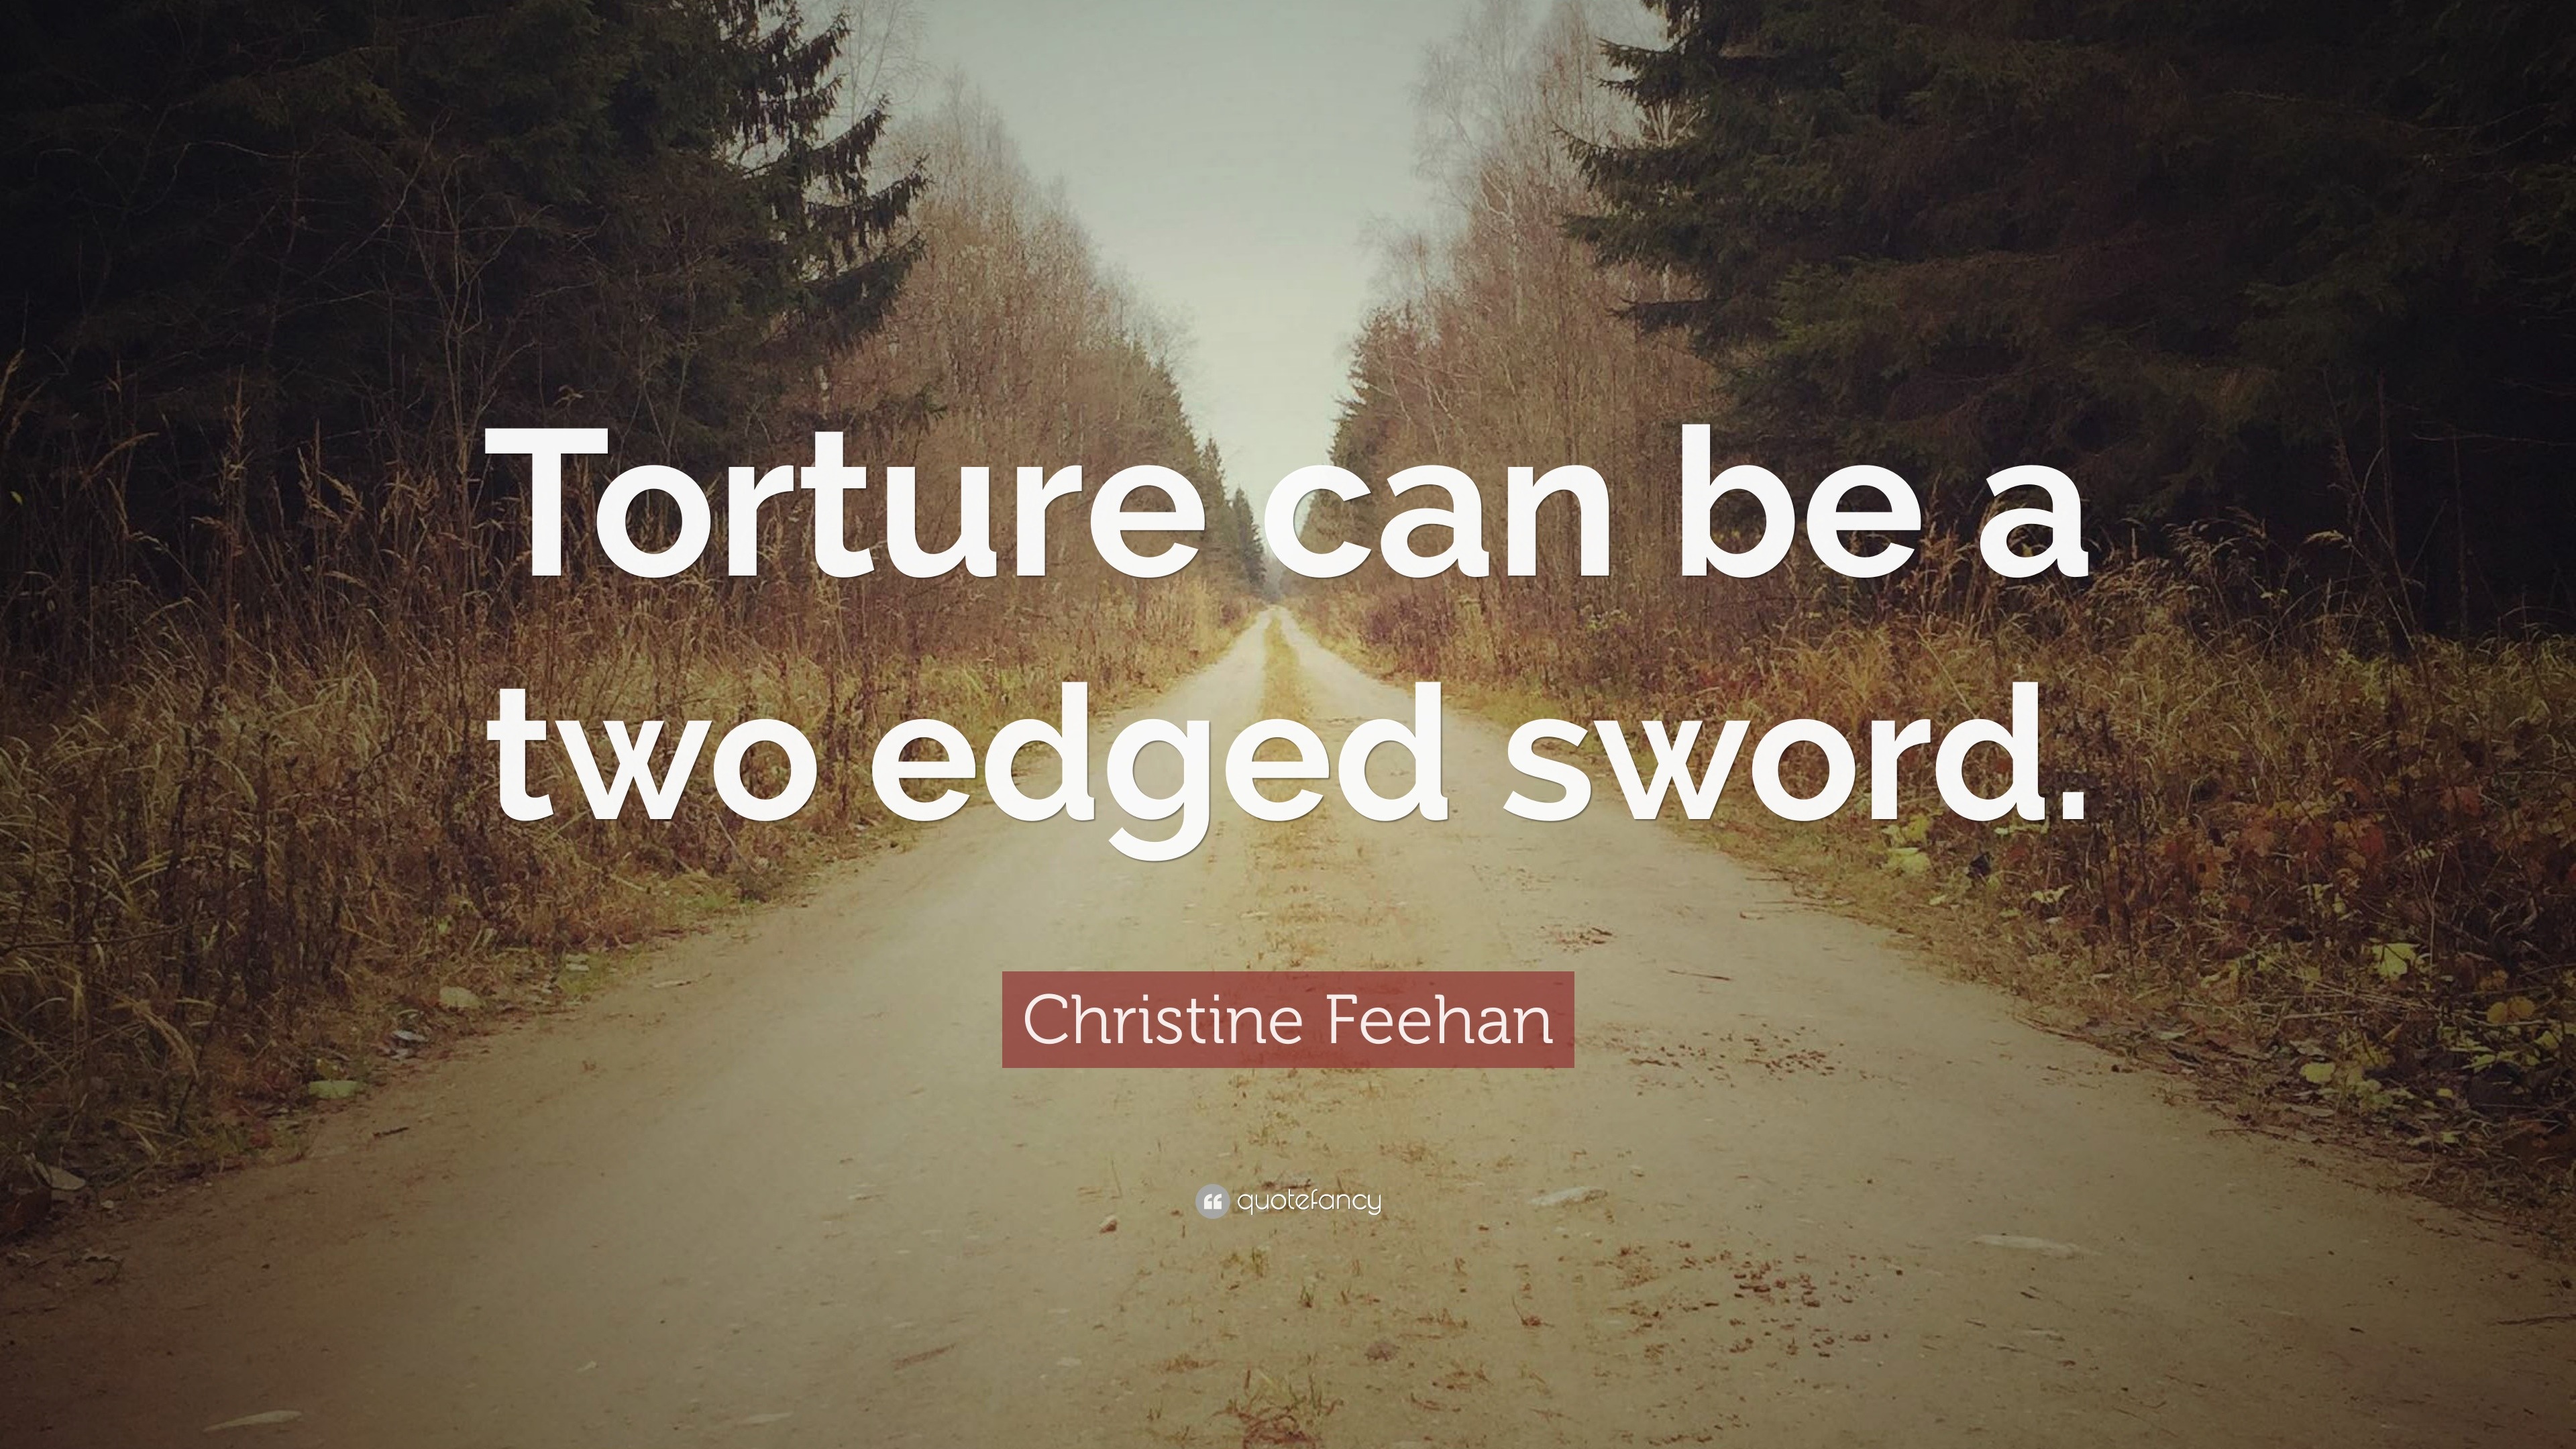 Christine Feehan Quote: "Torture can be a two edged sword."